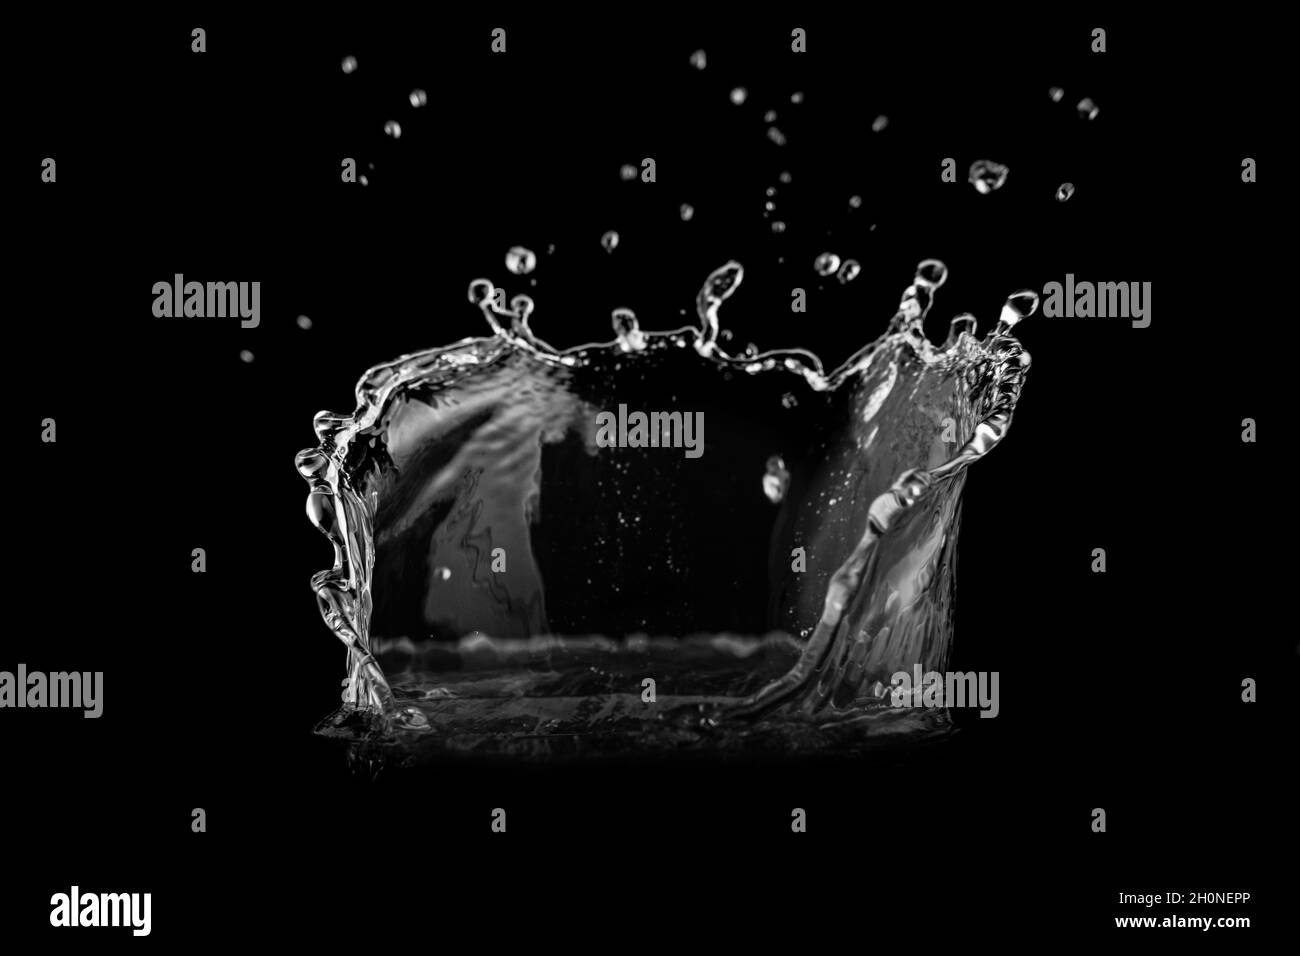 Water splash isolated on black background. Water texture. Stock Photo